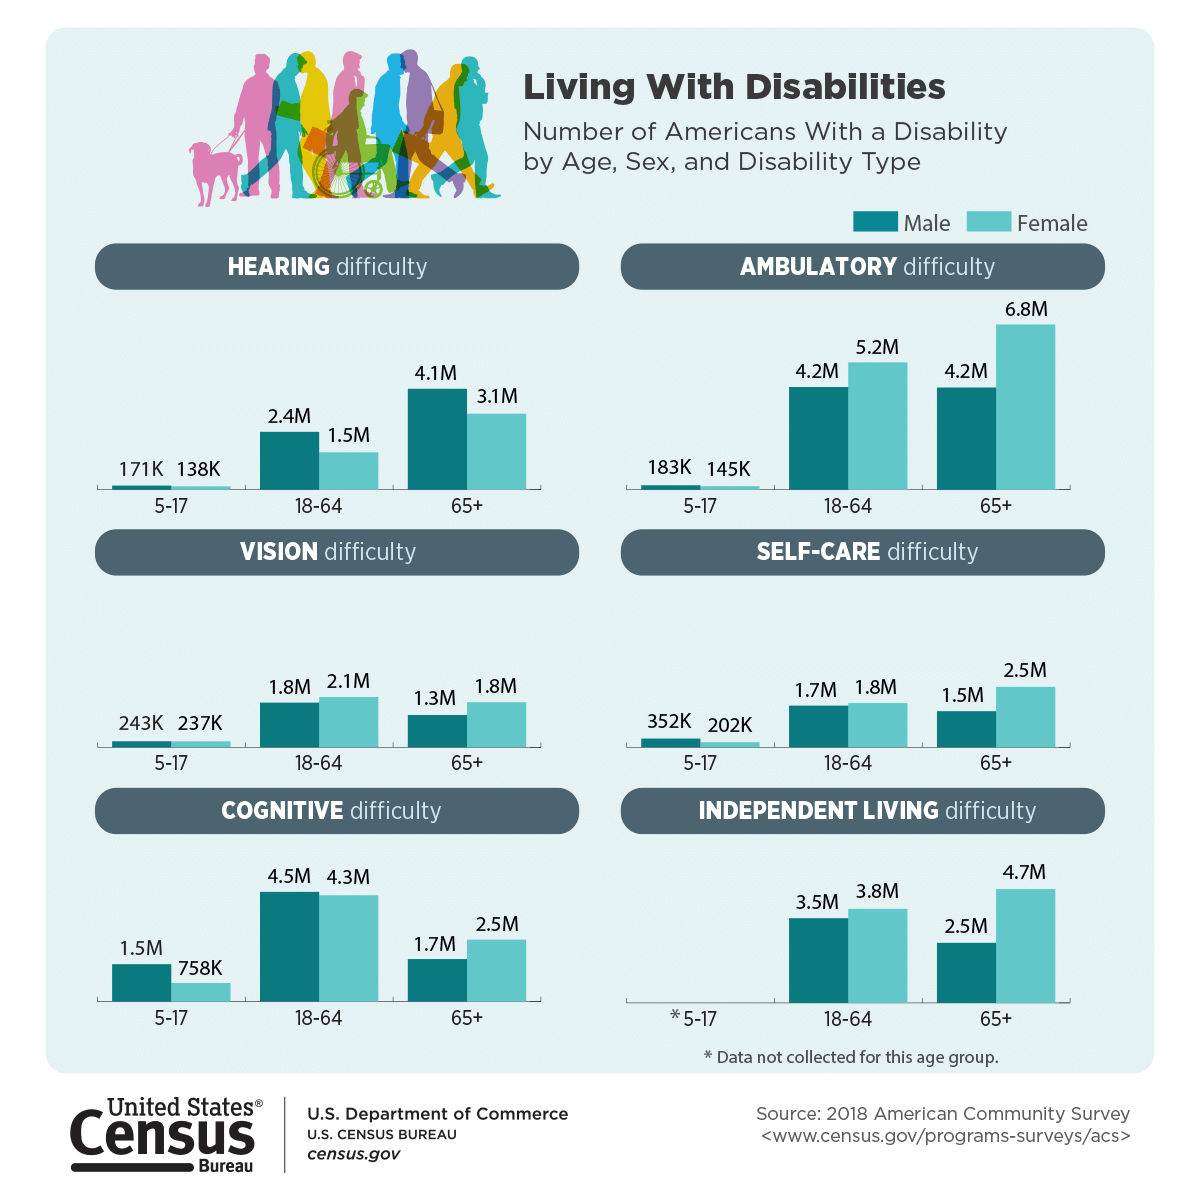 Living with Disabilities, 2018 American Community Survey